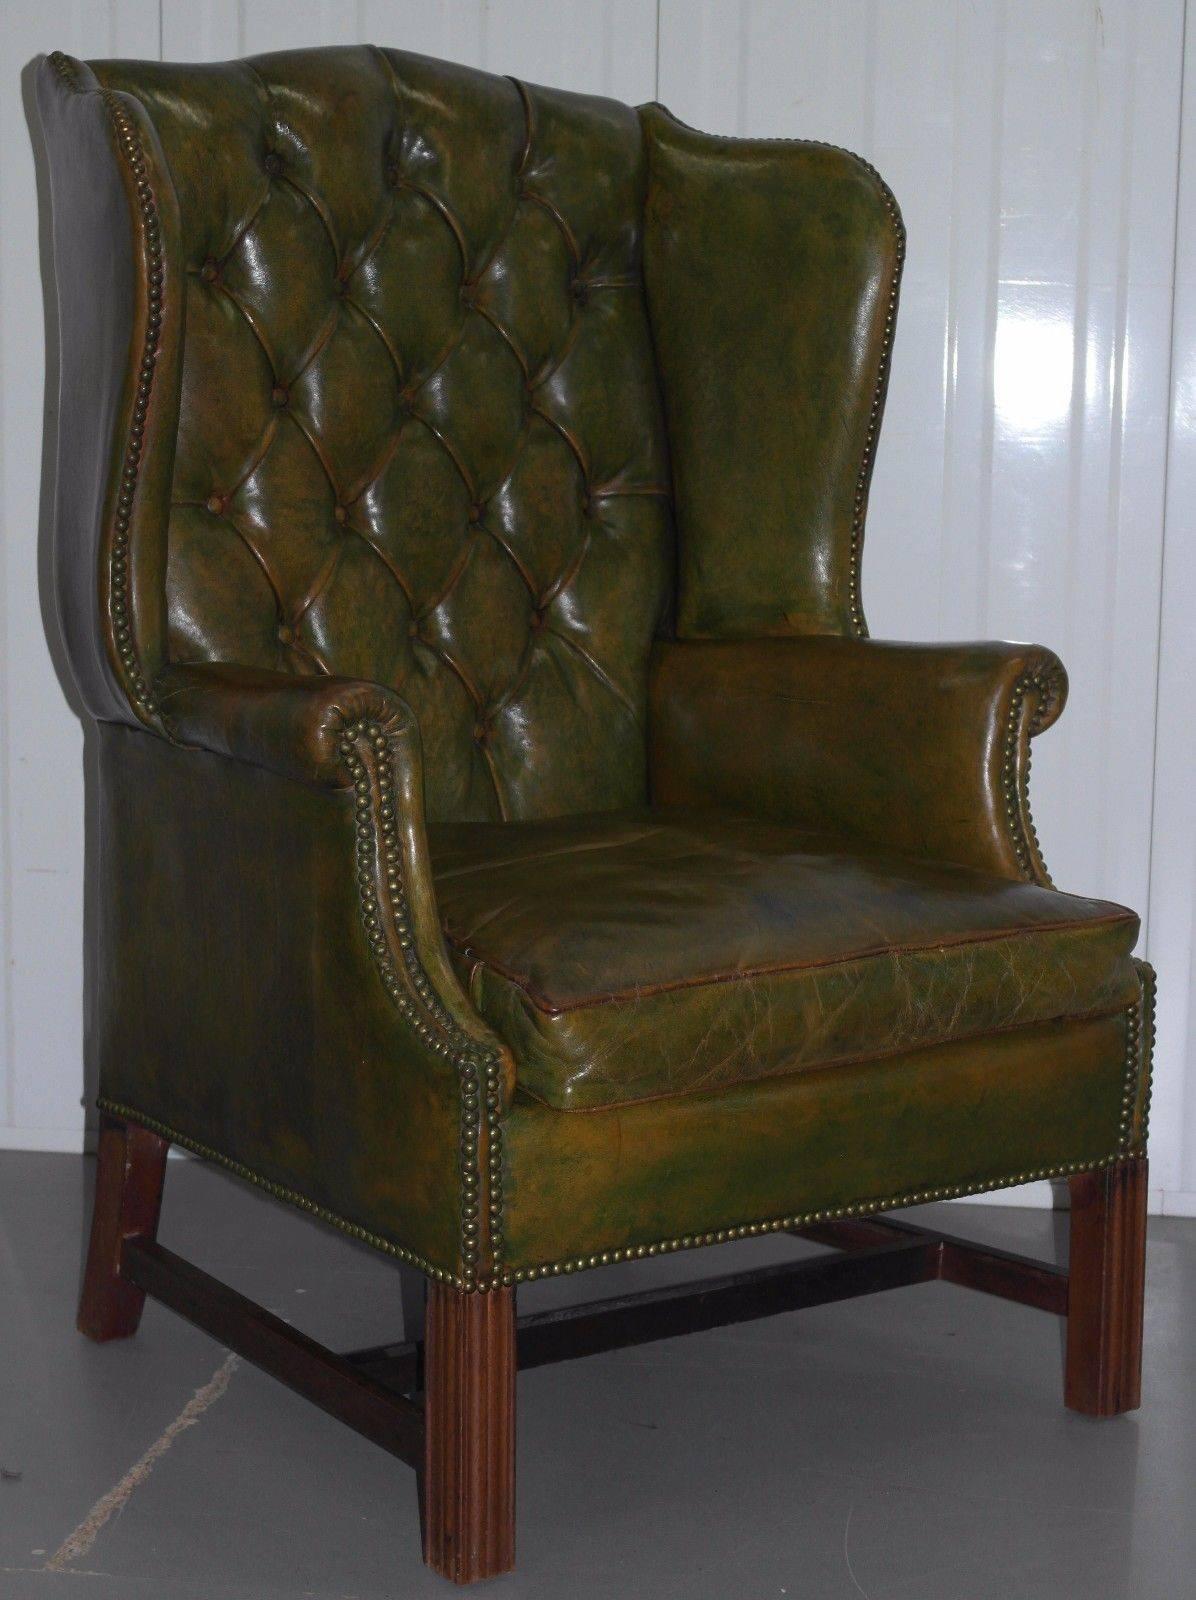 WIMBLEDON-FURNITURE

We are delighted to offer for this stunning Antique Georgian / Victorian Chesterfield wingback armchair

Please note the delivery fee listed is just a guide, for an accurate quote please send me your postcode and I'll price it